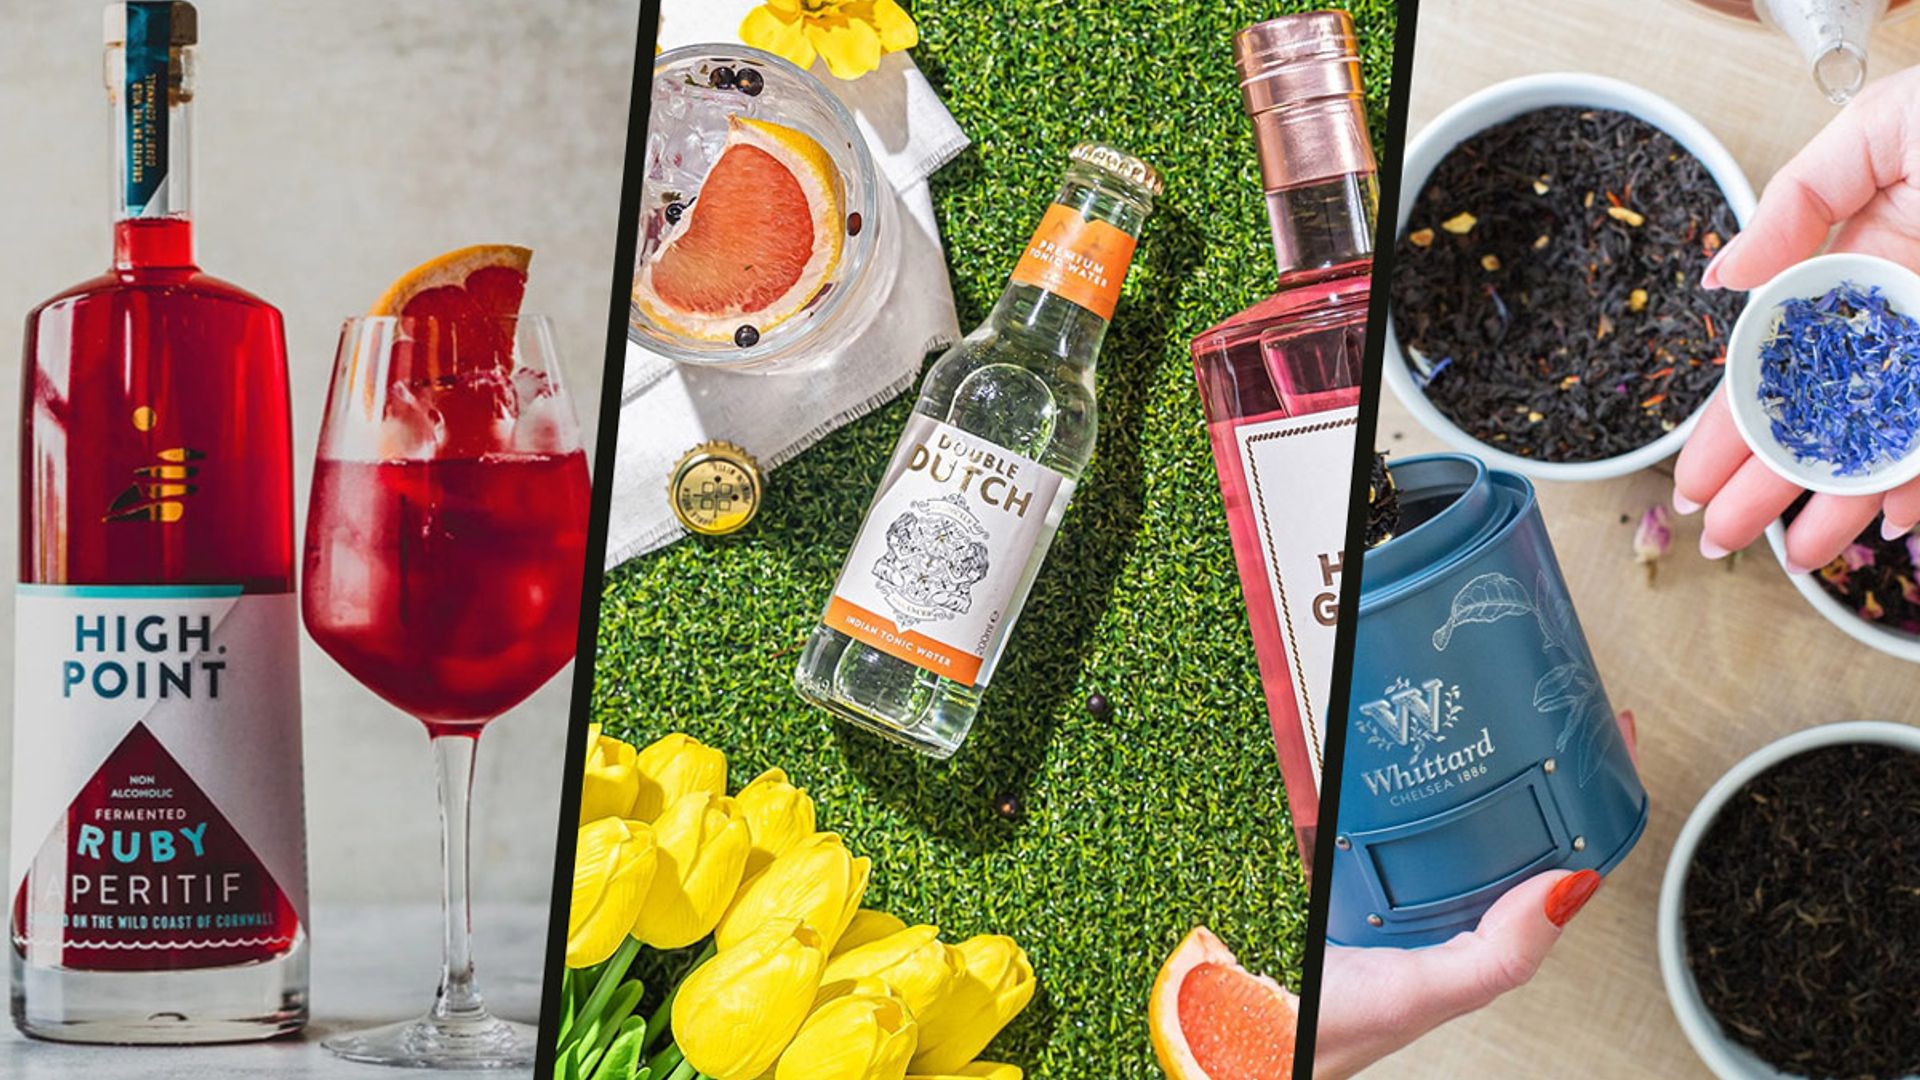 7 drink options we're enjoying this month